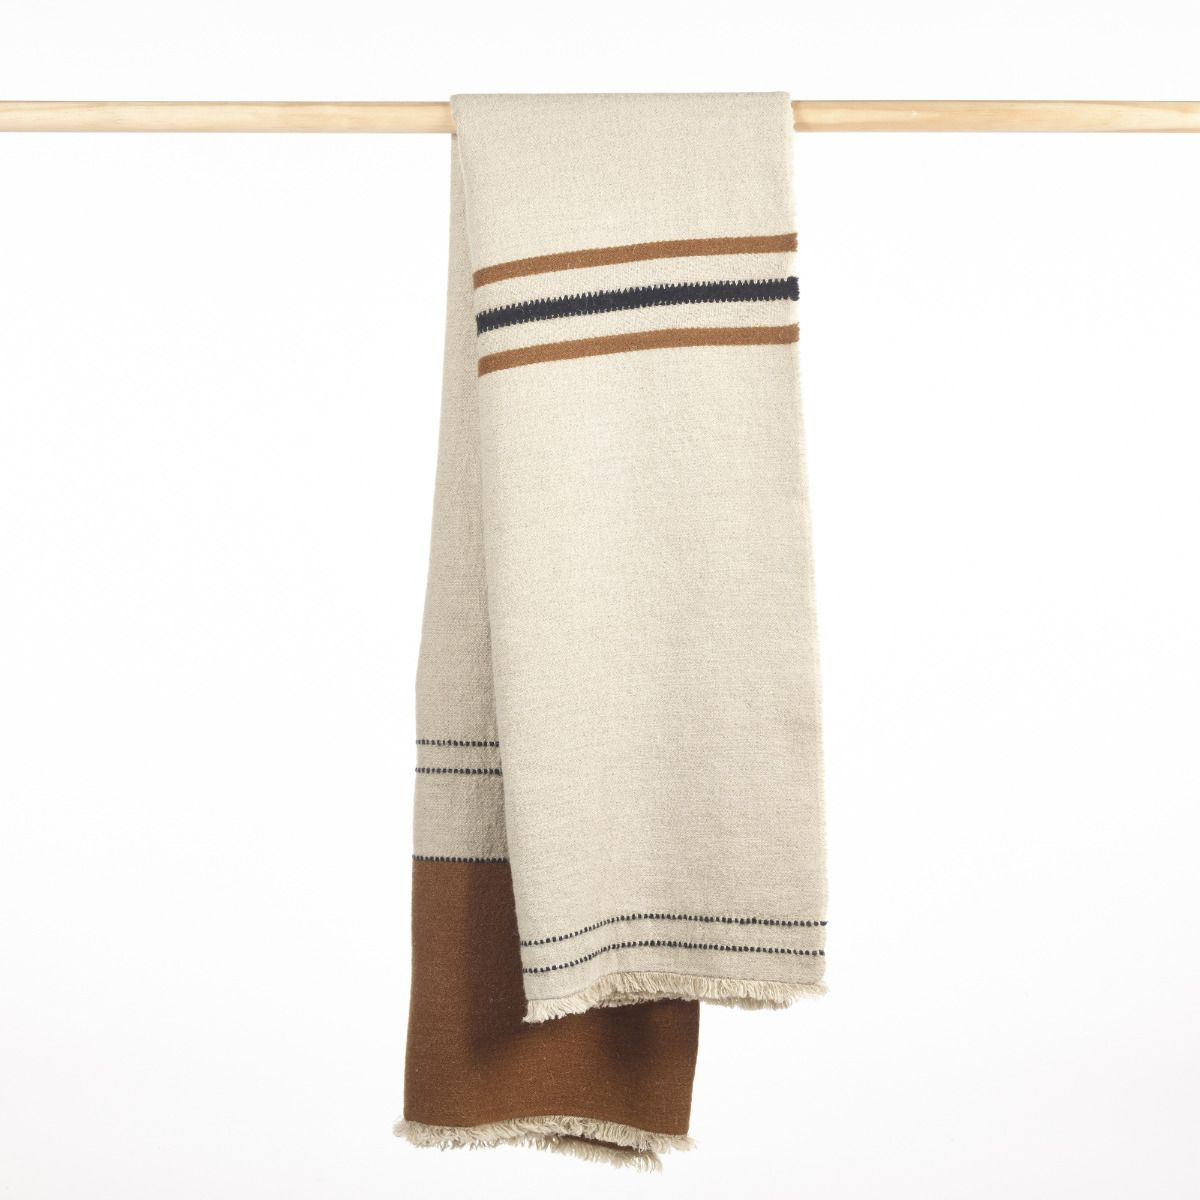 foundry throw blanket linen wool by libeco on adorn.house